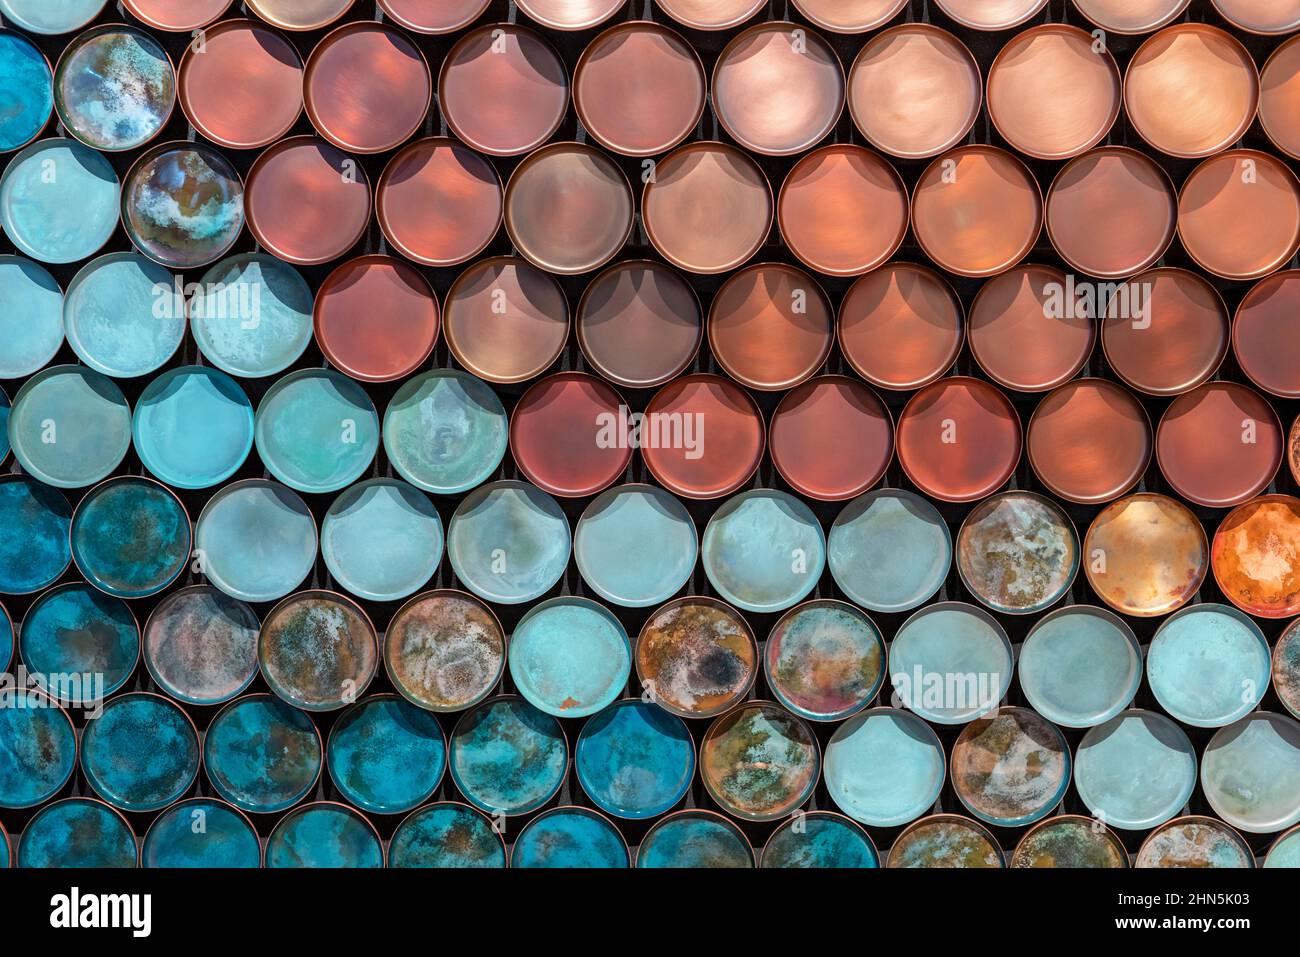 Top view of full frame textured backdrop of bright blue and red plates placed in parallel rows Stock Photo